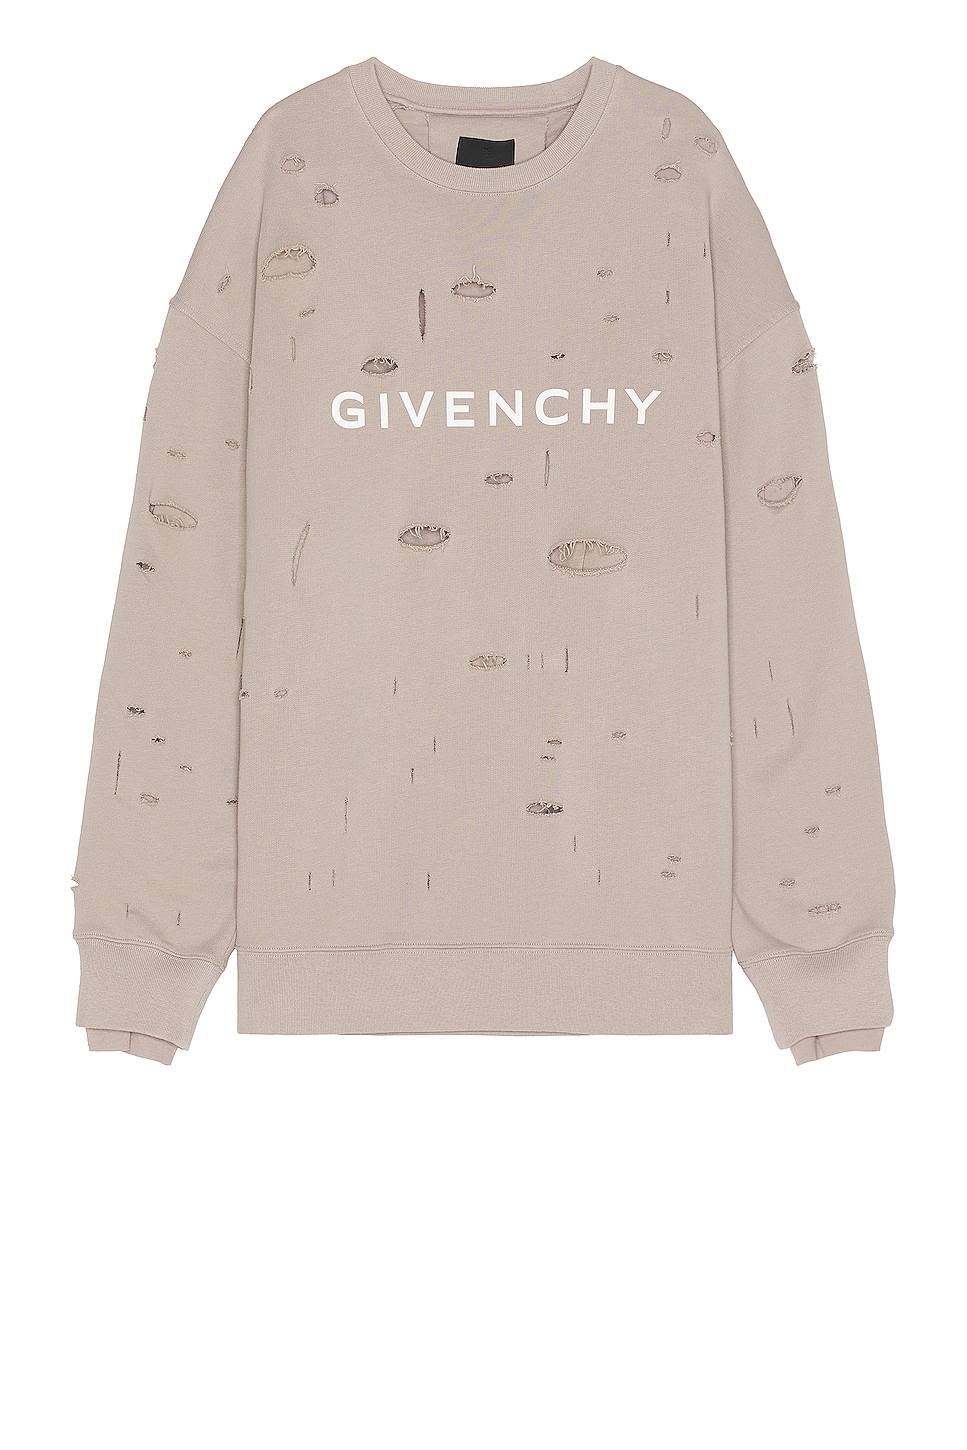 Image 1 of Givenchy Oversized Hole Sweater in Taupe